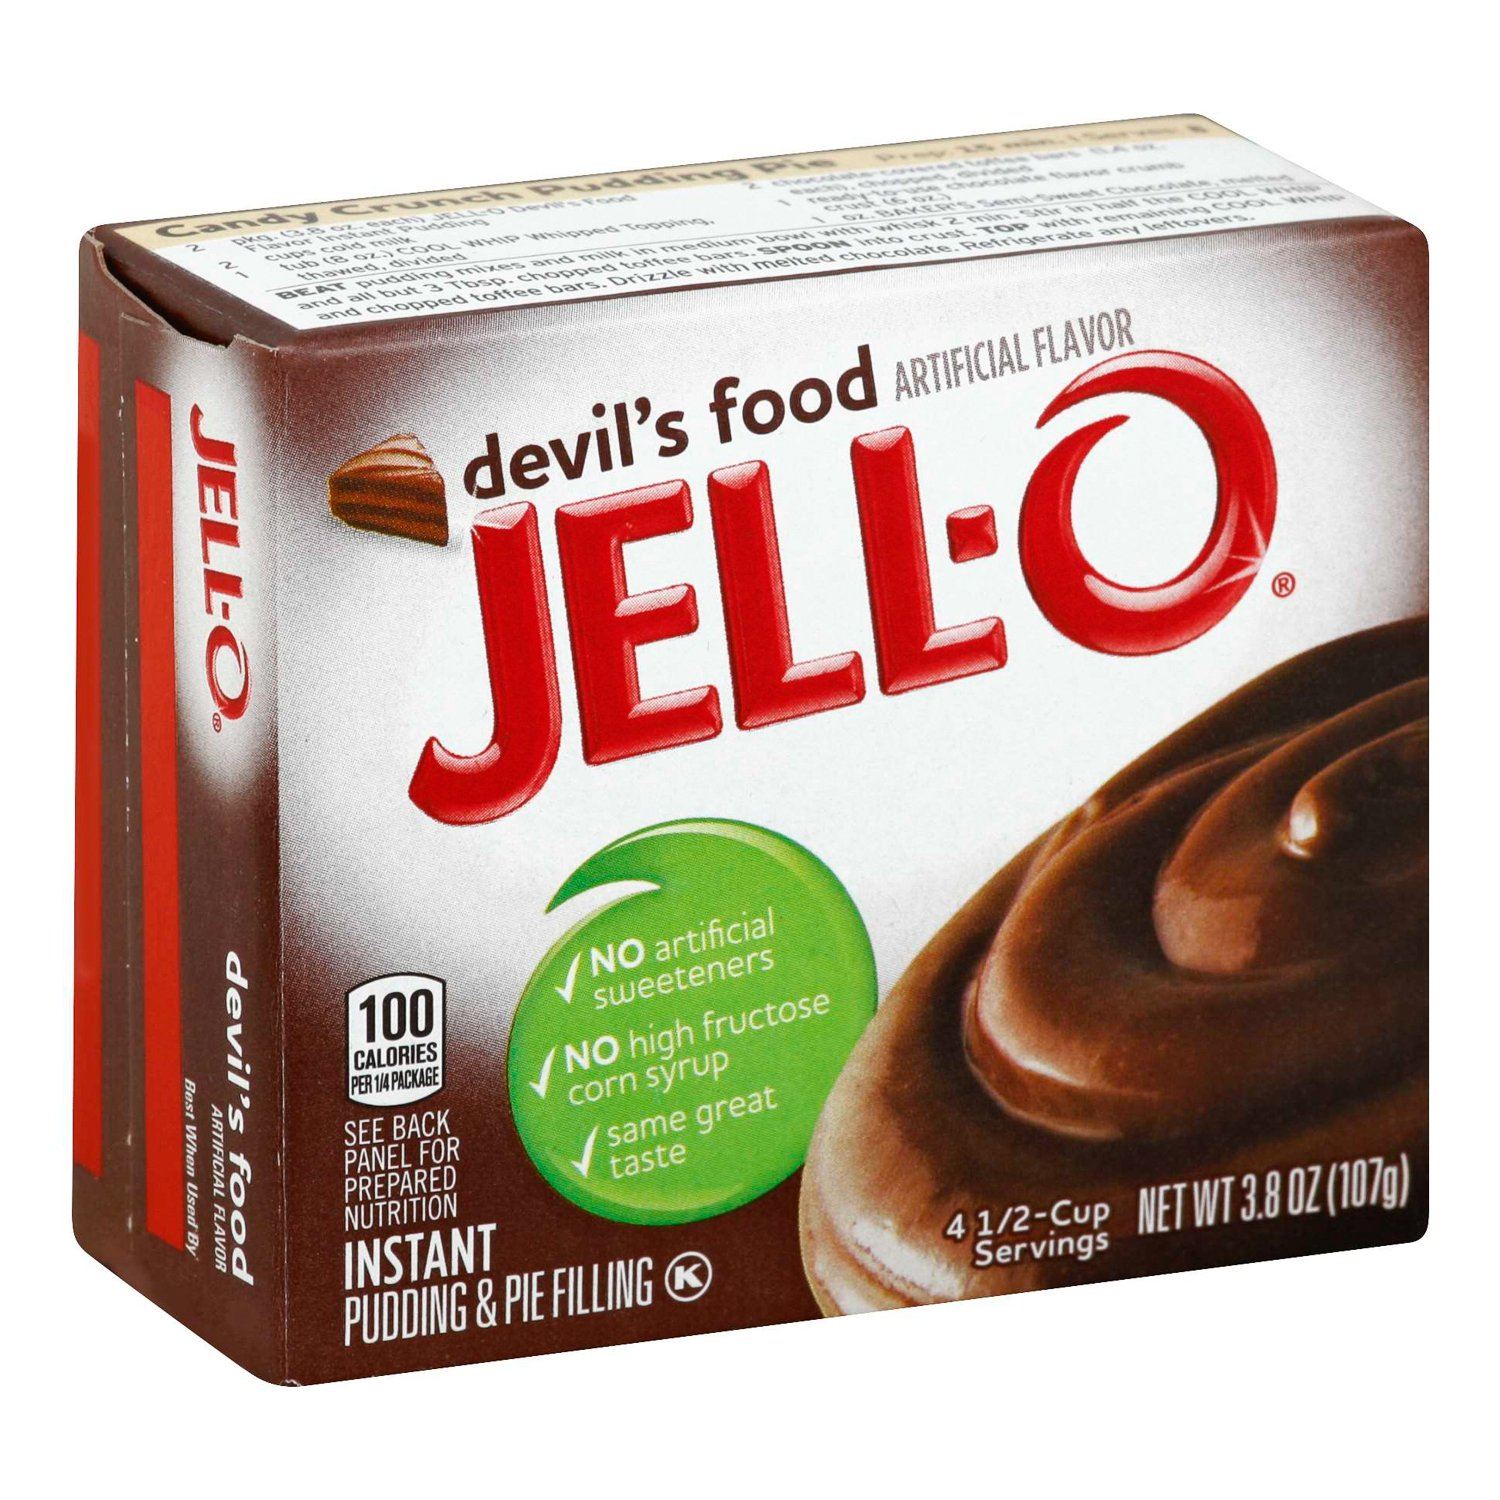 Jell-O Instant Pudding & Pie Filling Mixes Jell-O Devil's Food 3.8 Ounce 